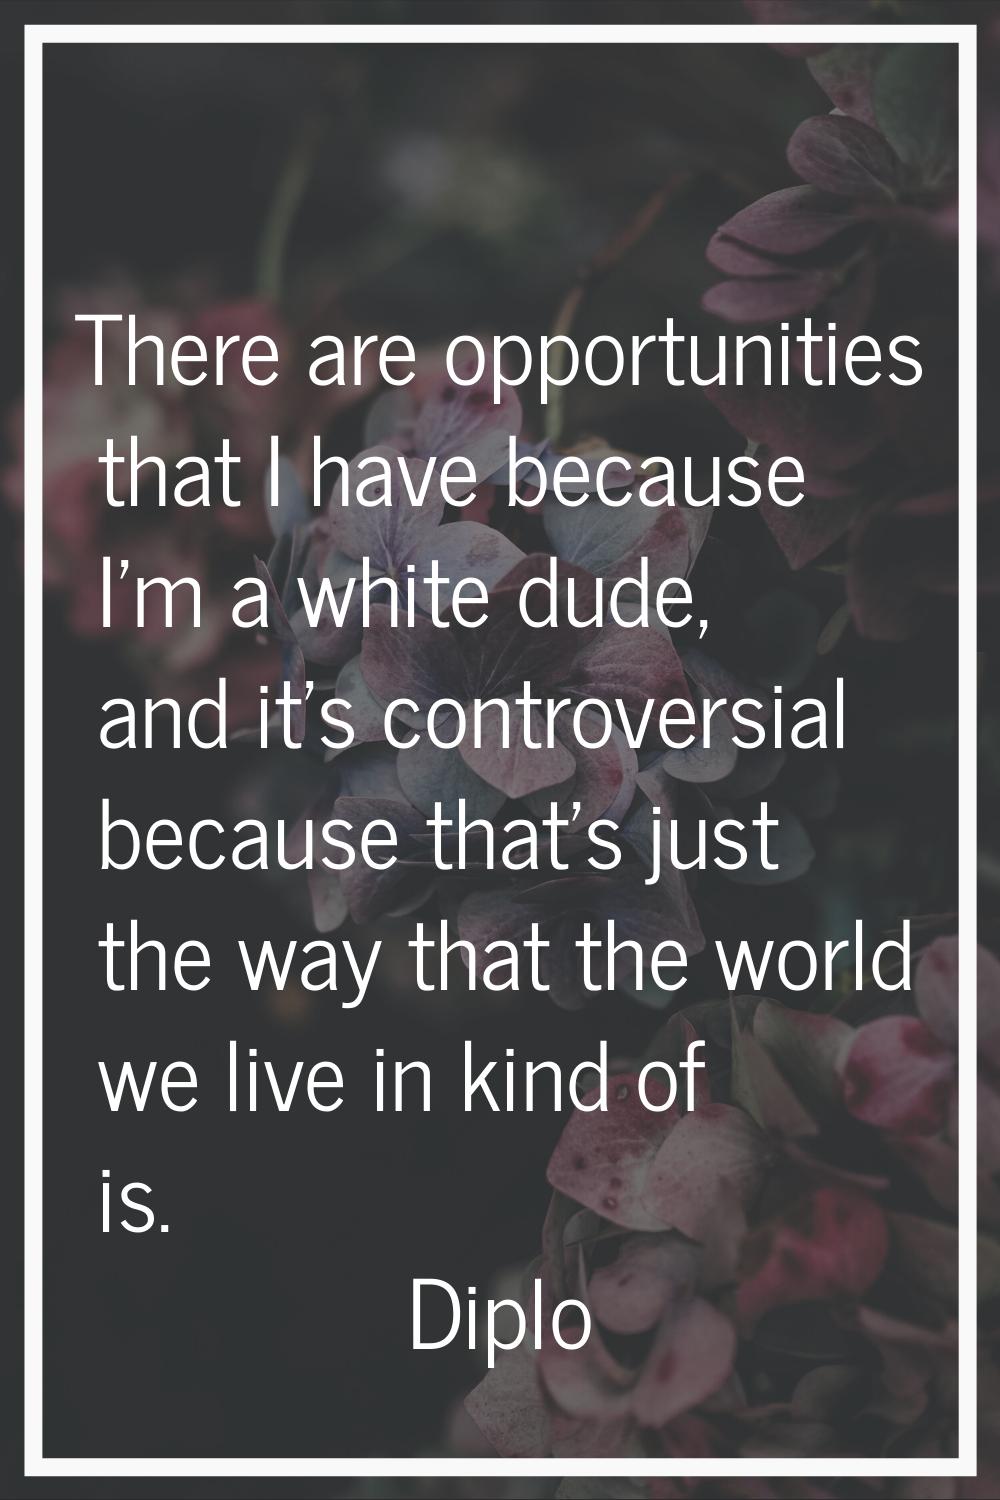 There are opportunities that I have because I'm a white dude, and it's controversial because that's